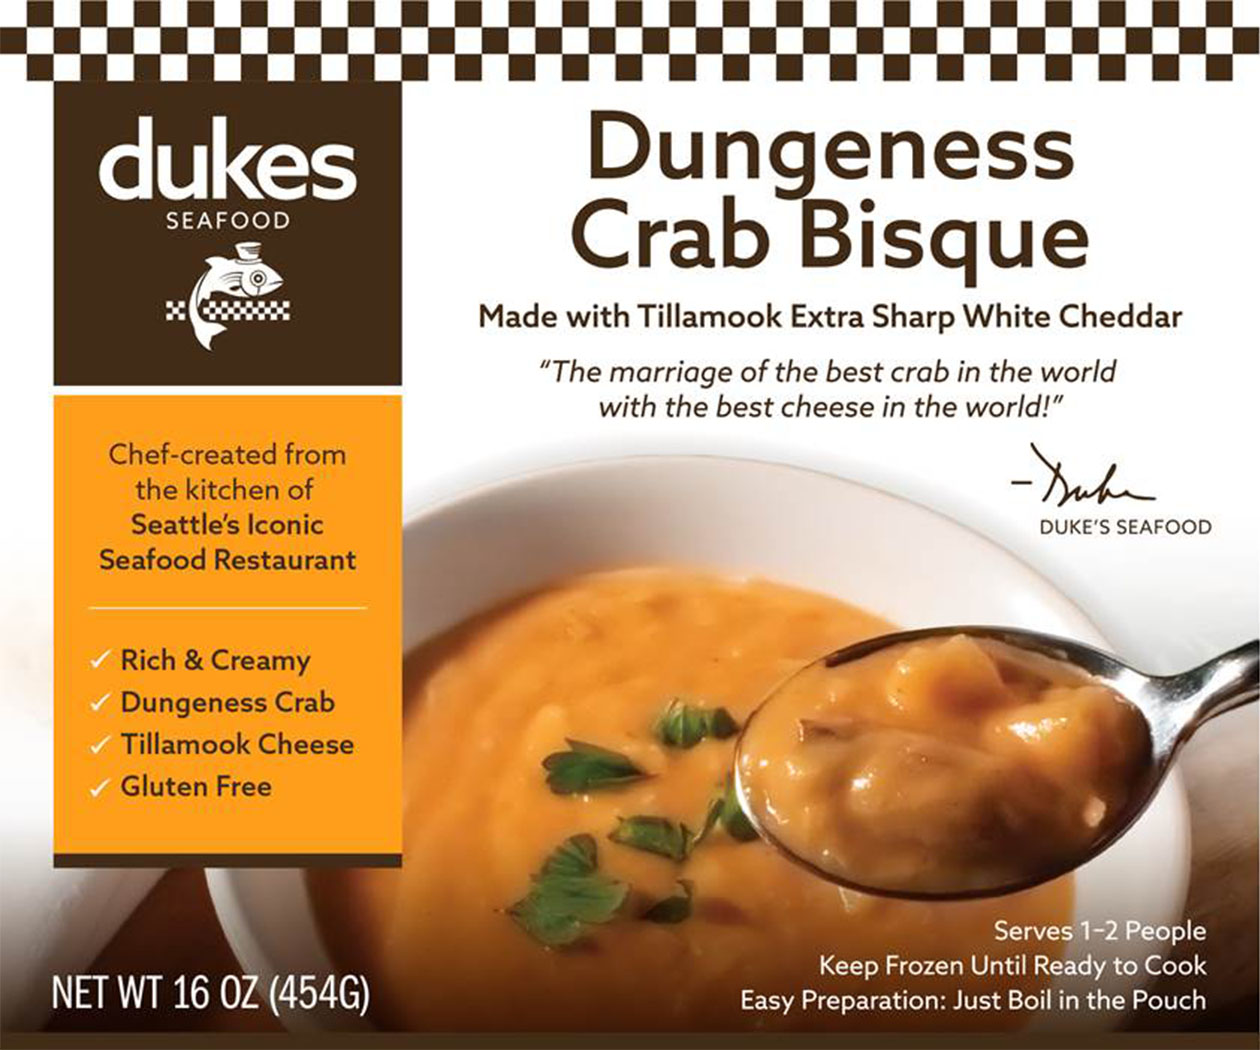 Duke's Seafood Dungeness Crab Bisque